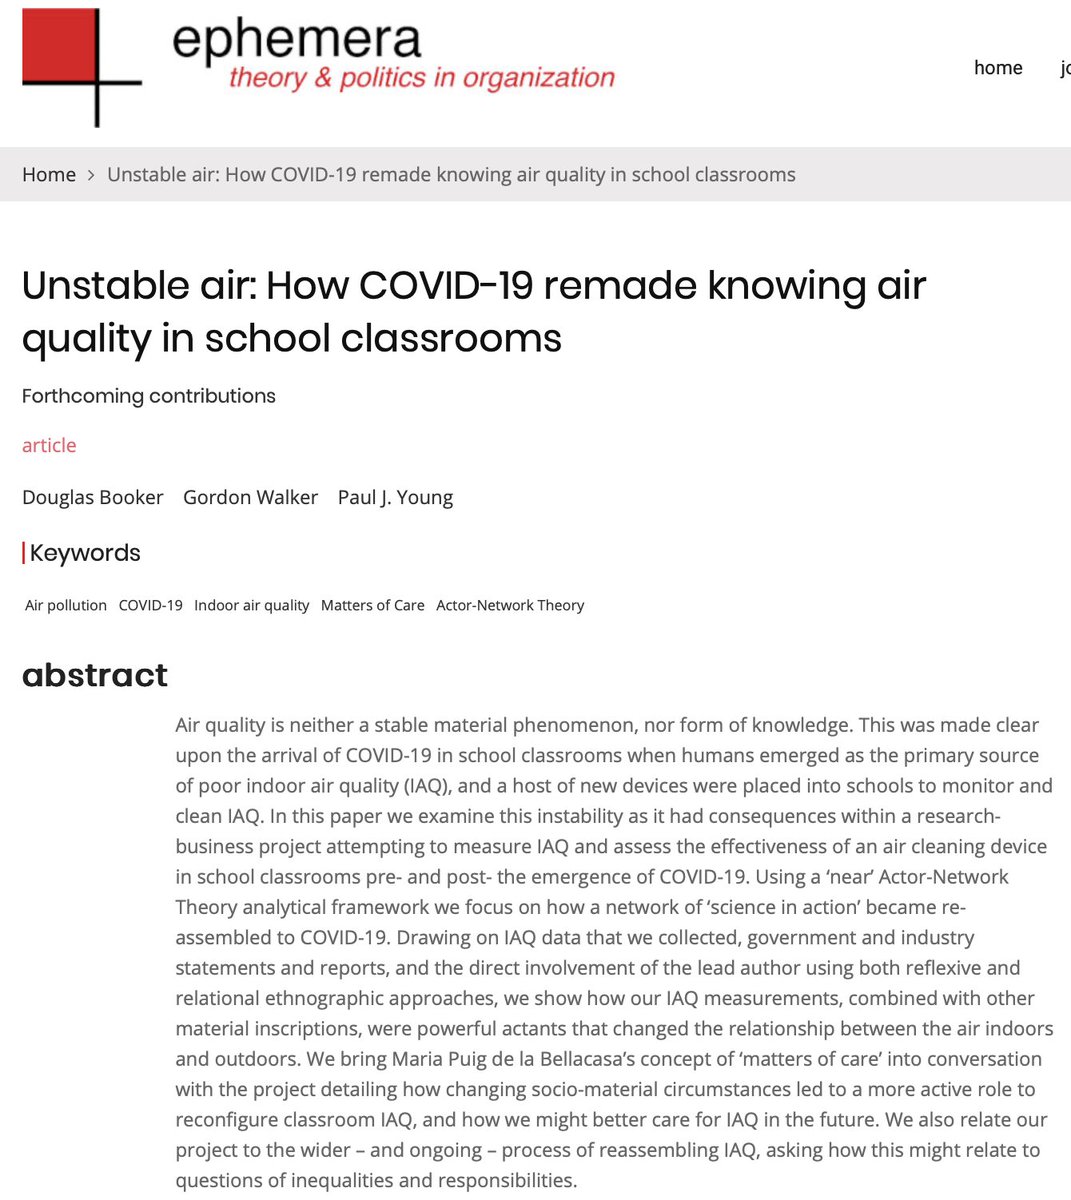 New paper (w/ @profgpw & @pjyng) now published in @EphemeraJournal! We combine school indoor air quality (IAQ) data & social theory to see how COVID-19 changed the meaning of IAQ, before looking at potential future air inequalities. ephemerajournal.org/contribution/u…